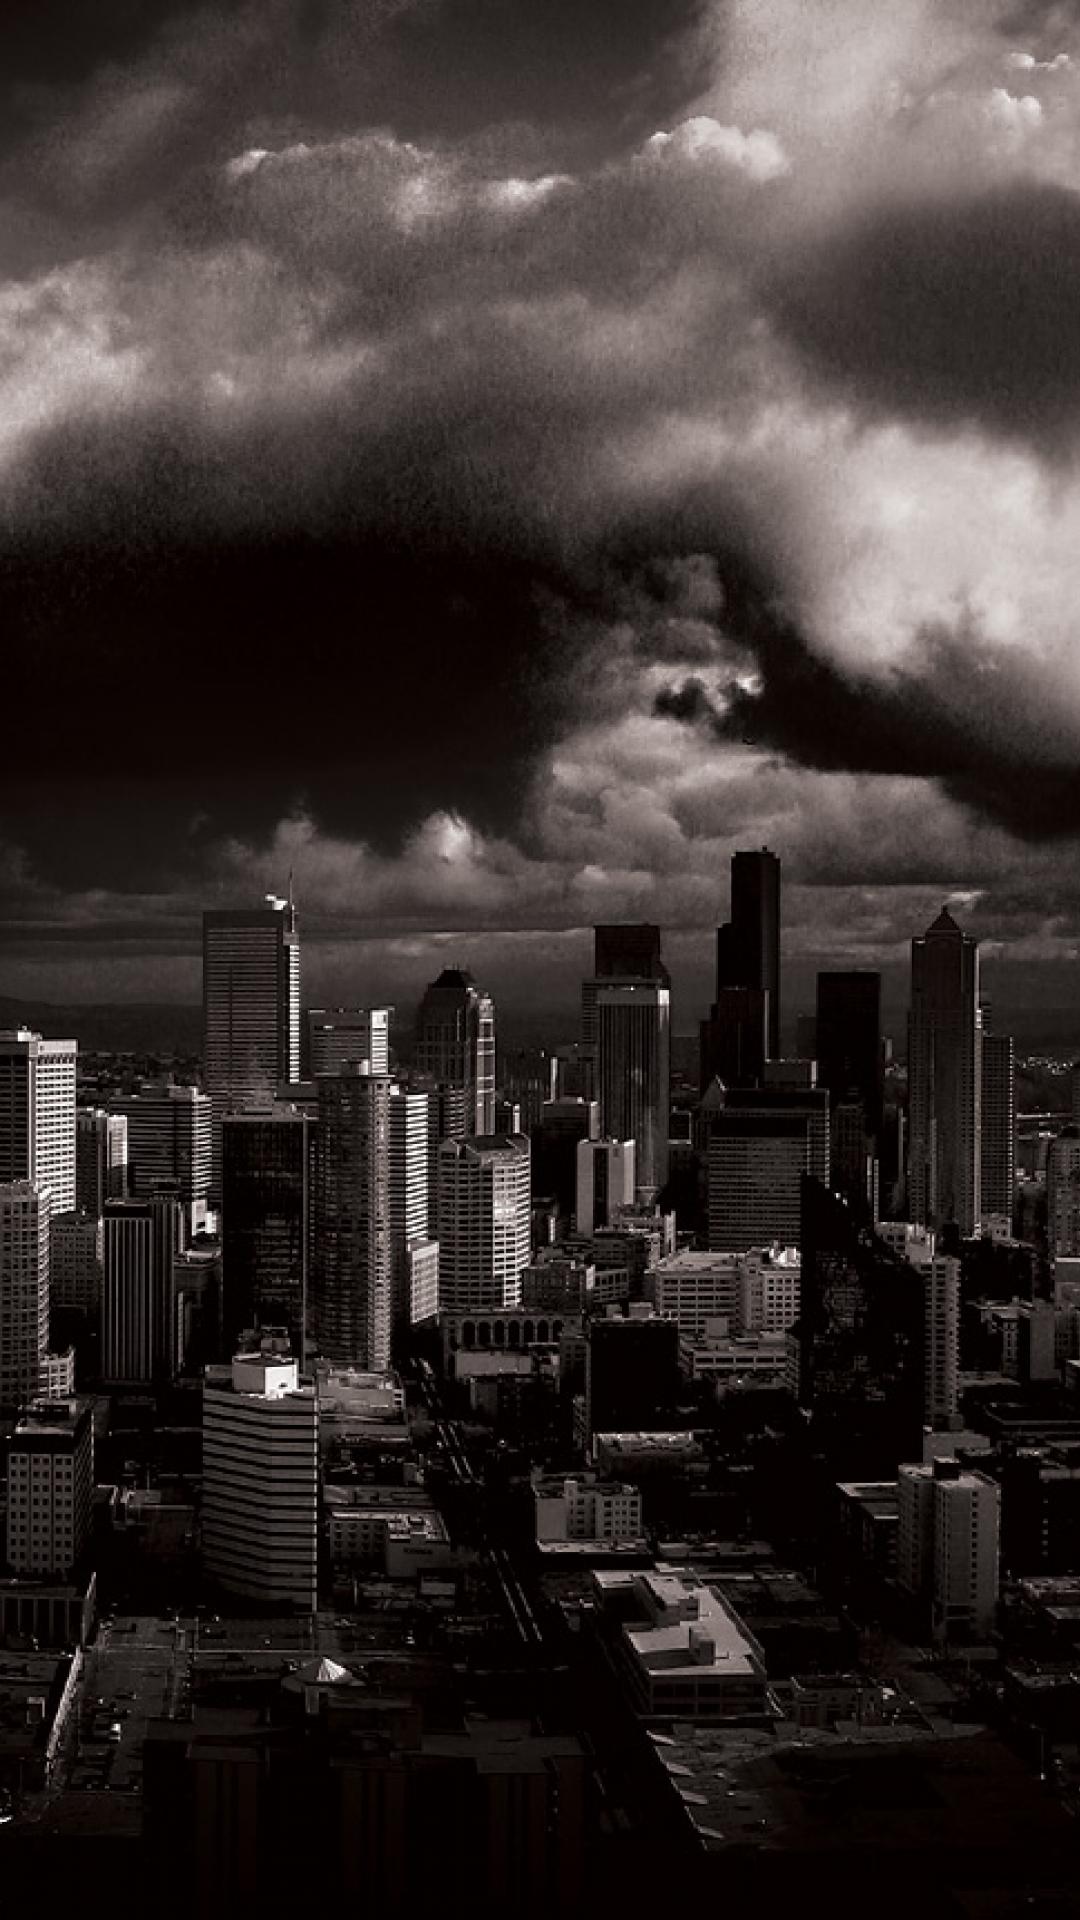 stormy seattle grayscale dual monitor hd quality Csd 1080x1920